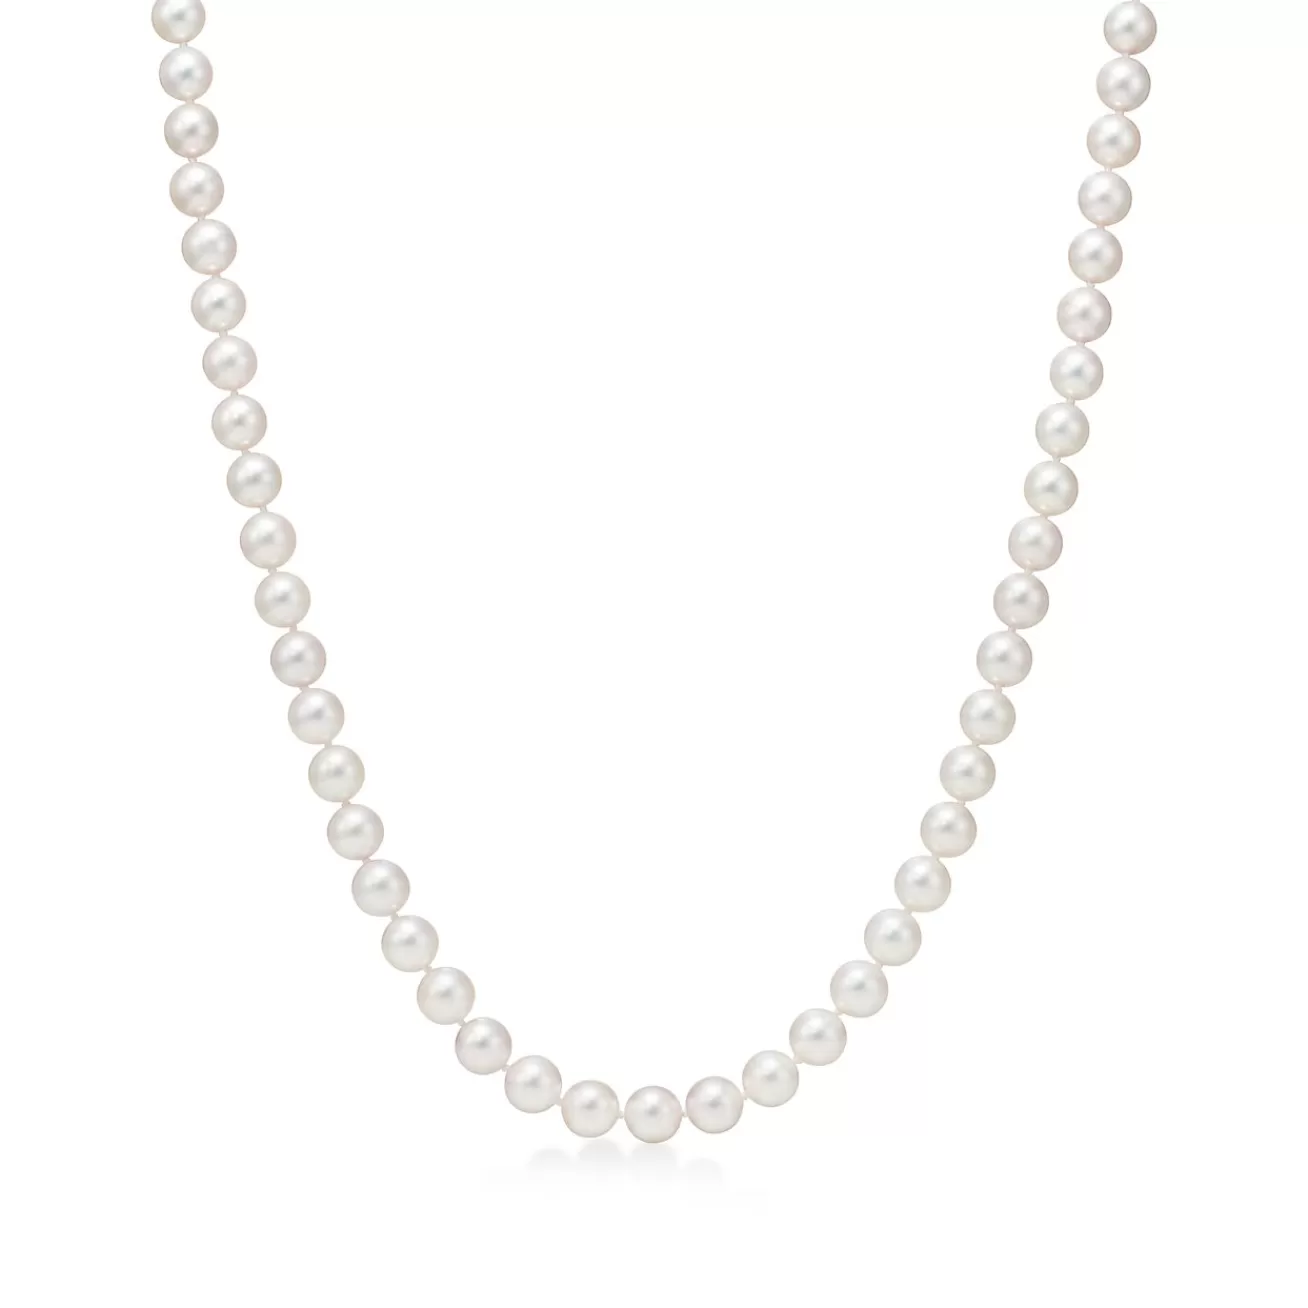 Tiffany & Co. Tiffany Essential Pearls necklace of Akoya pearls with an 18k white gold clasp. | ^ Pearl Jewelry